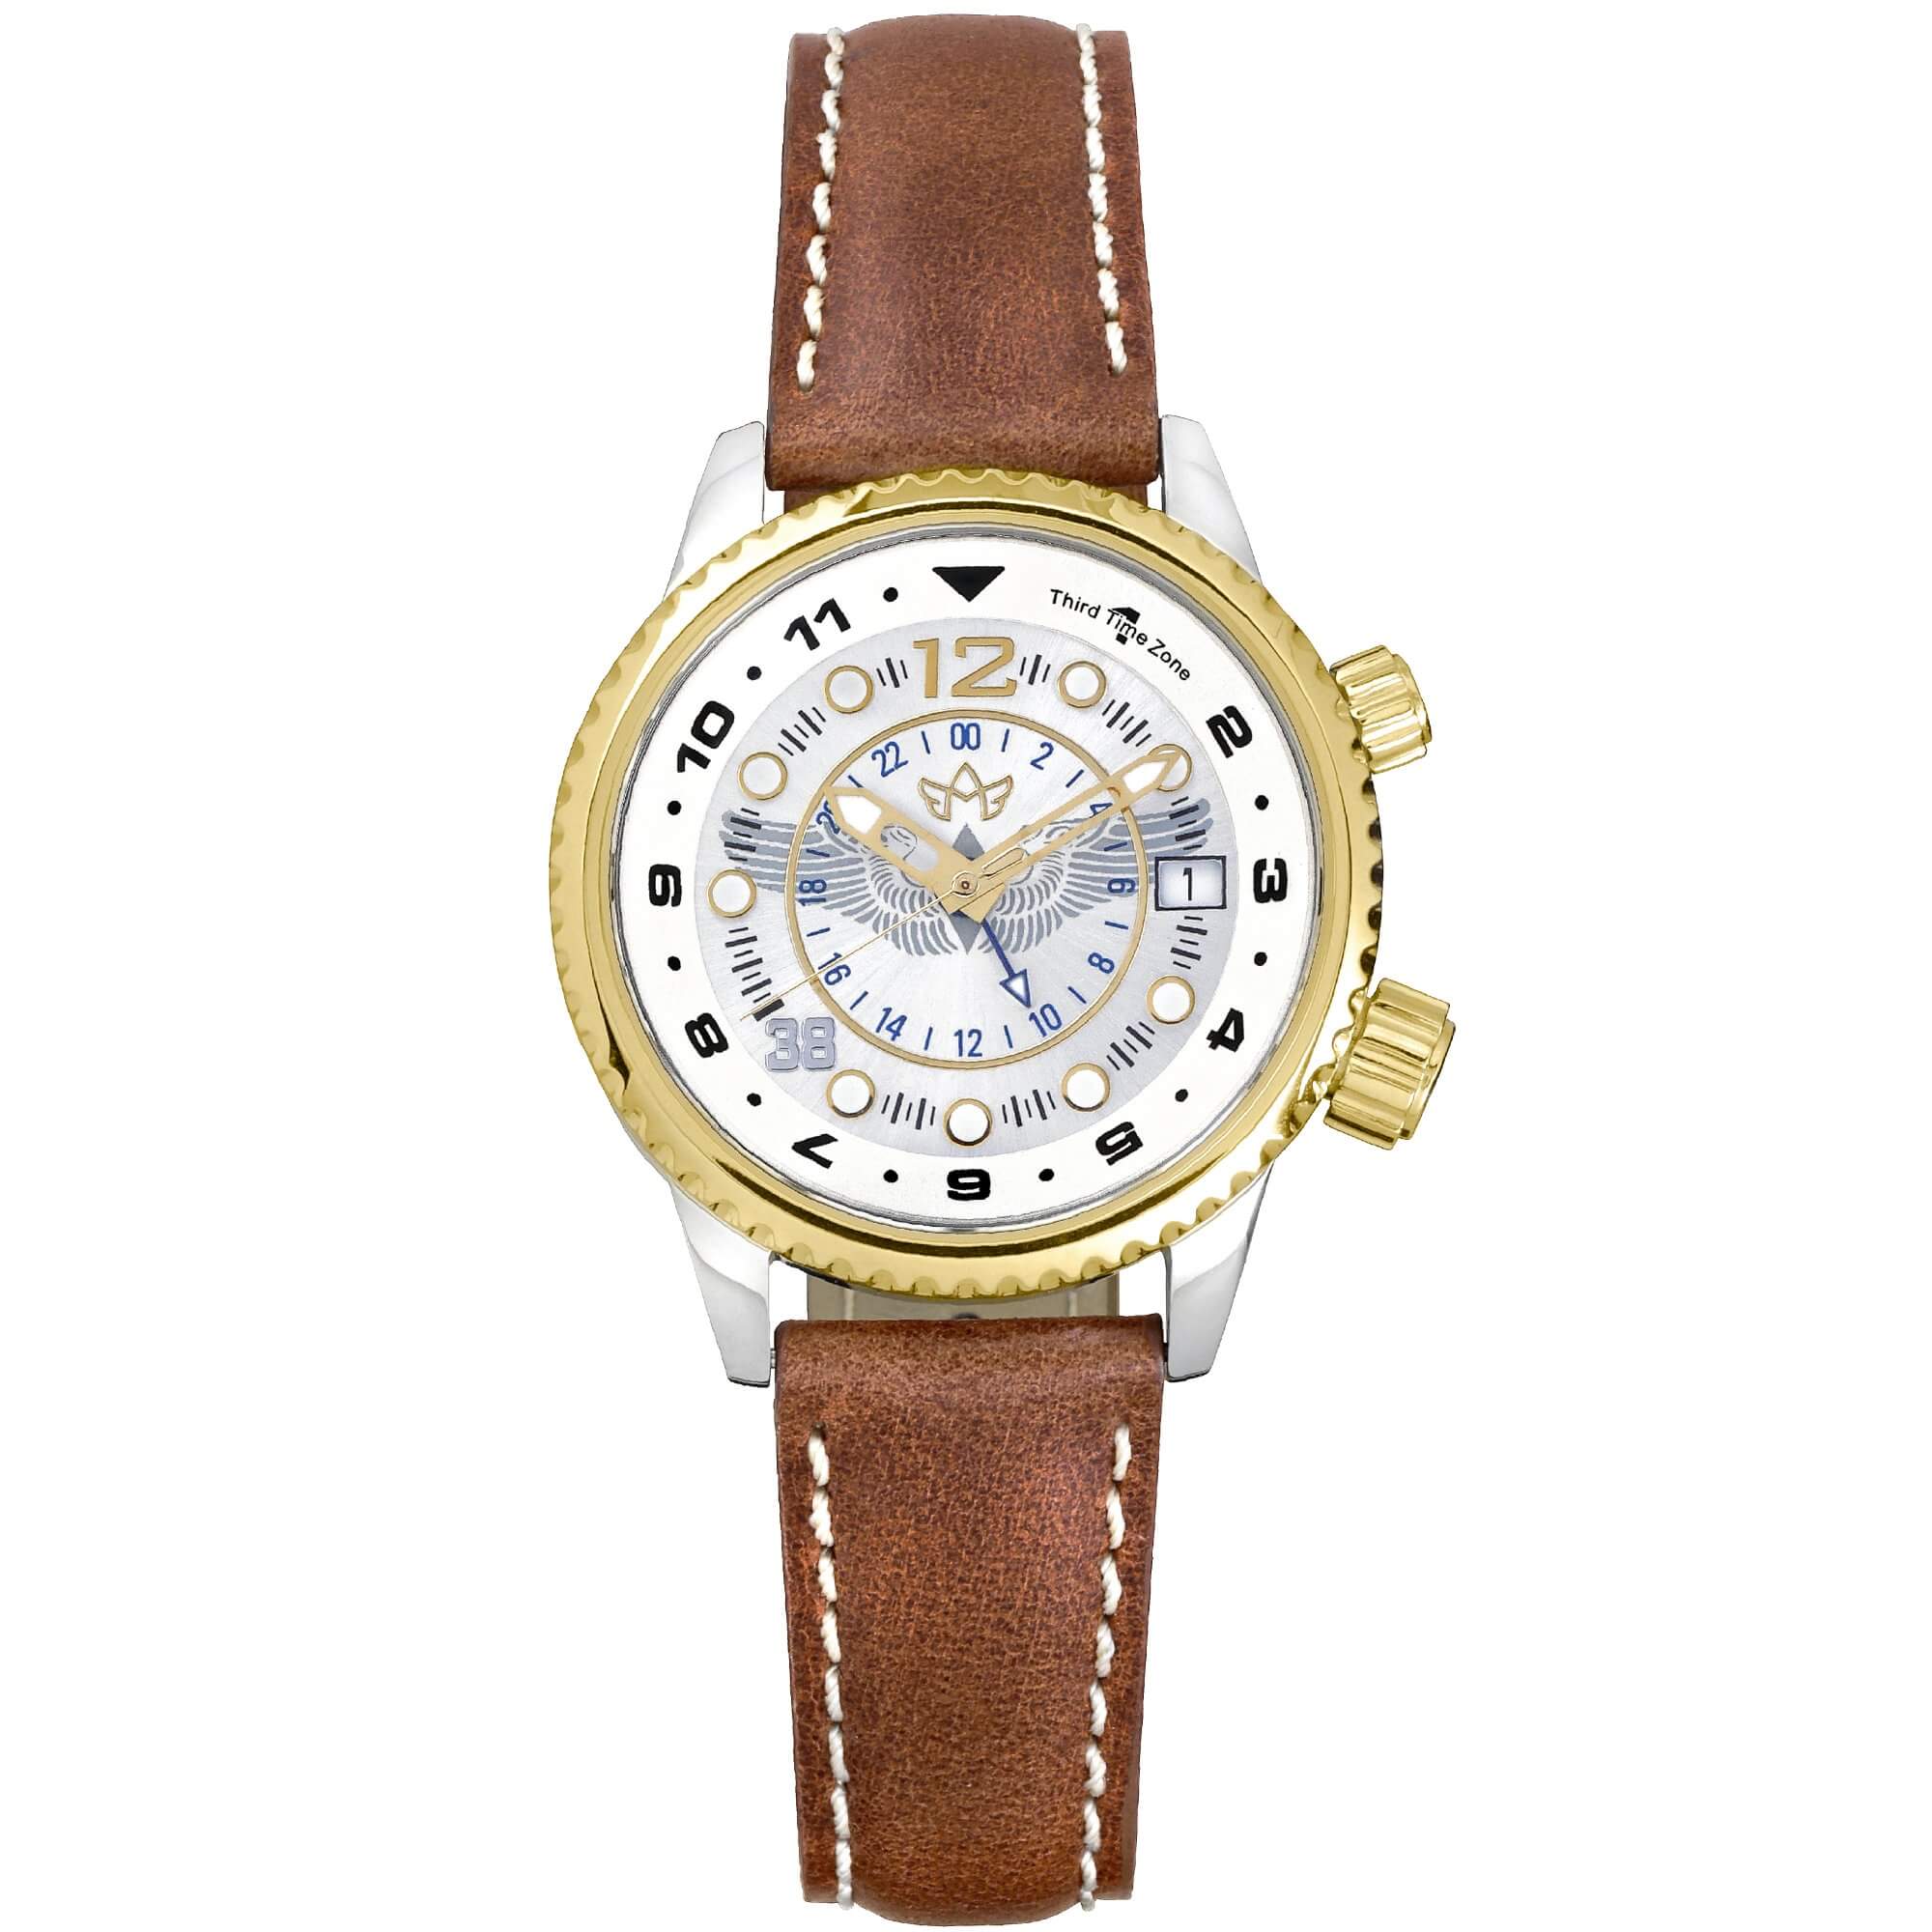 Abingdon Co. image displaying limited edition WASP analog watch with 24k gold and steel case and genuine leather strap. Three time zone watch with a sunray dial - front image